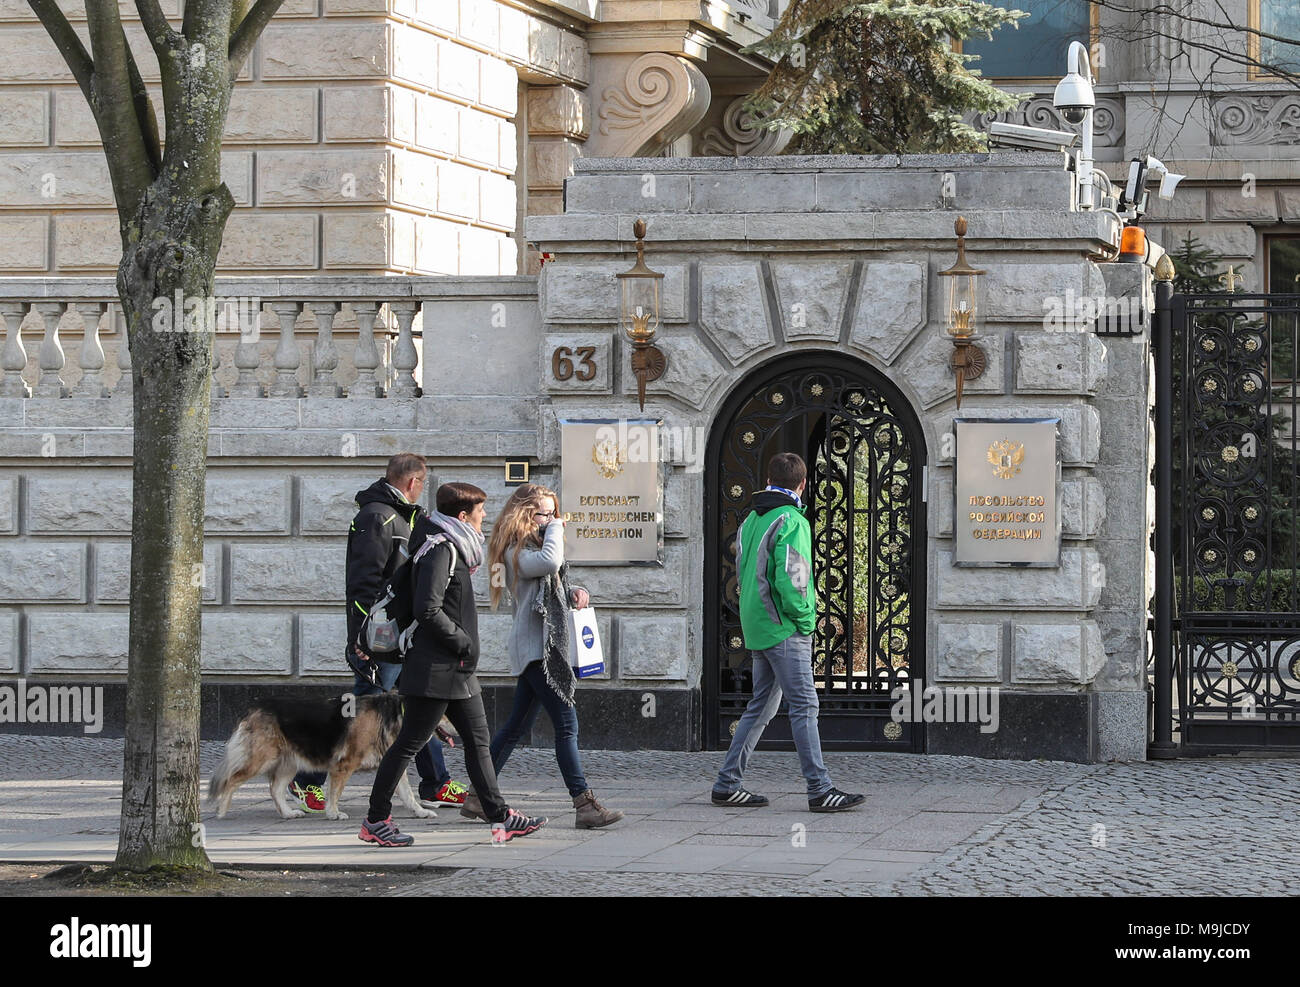 Berlin, Germany. 26th Mar, 2018. Pedestrians pass by Russian Embassy in Berlin, capital of Germany, on March 26, 2018. Germany announced Monday that it will expel four Russian diplomats over the poisoning of former double agent Sergei Skripal and his daughter in Britain. Credit: Shan Yuqi/Xinhua/Alamy Live News Stock Photo